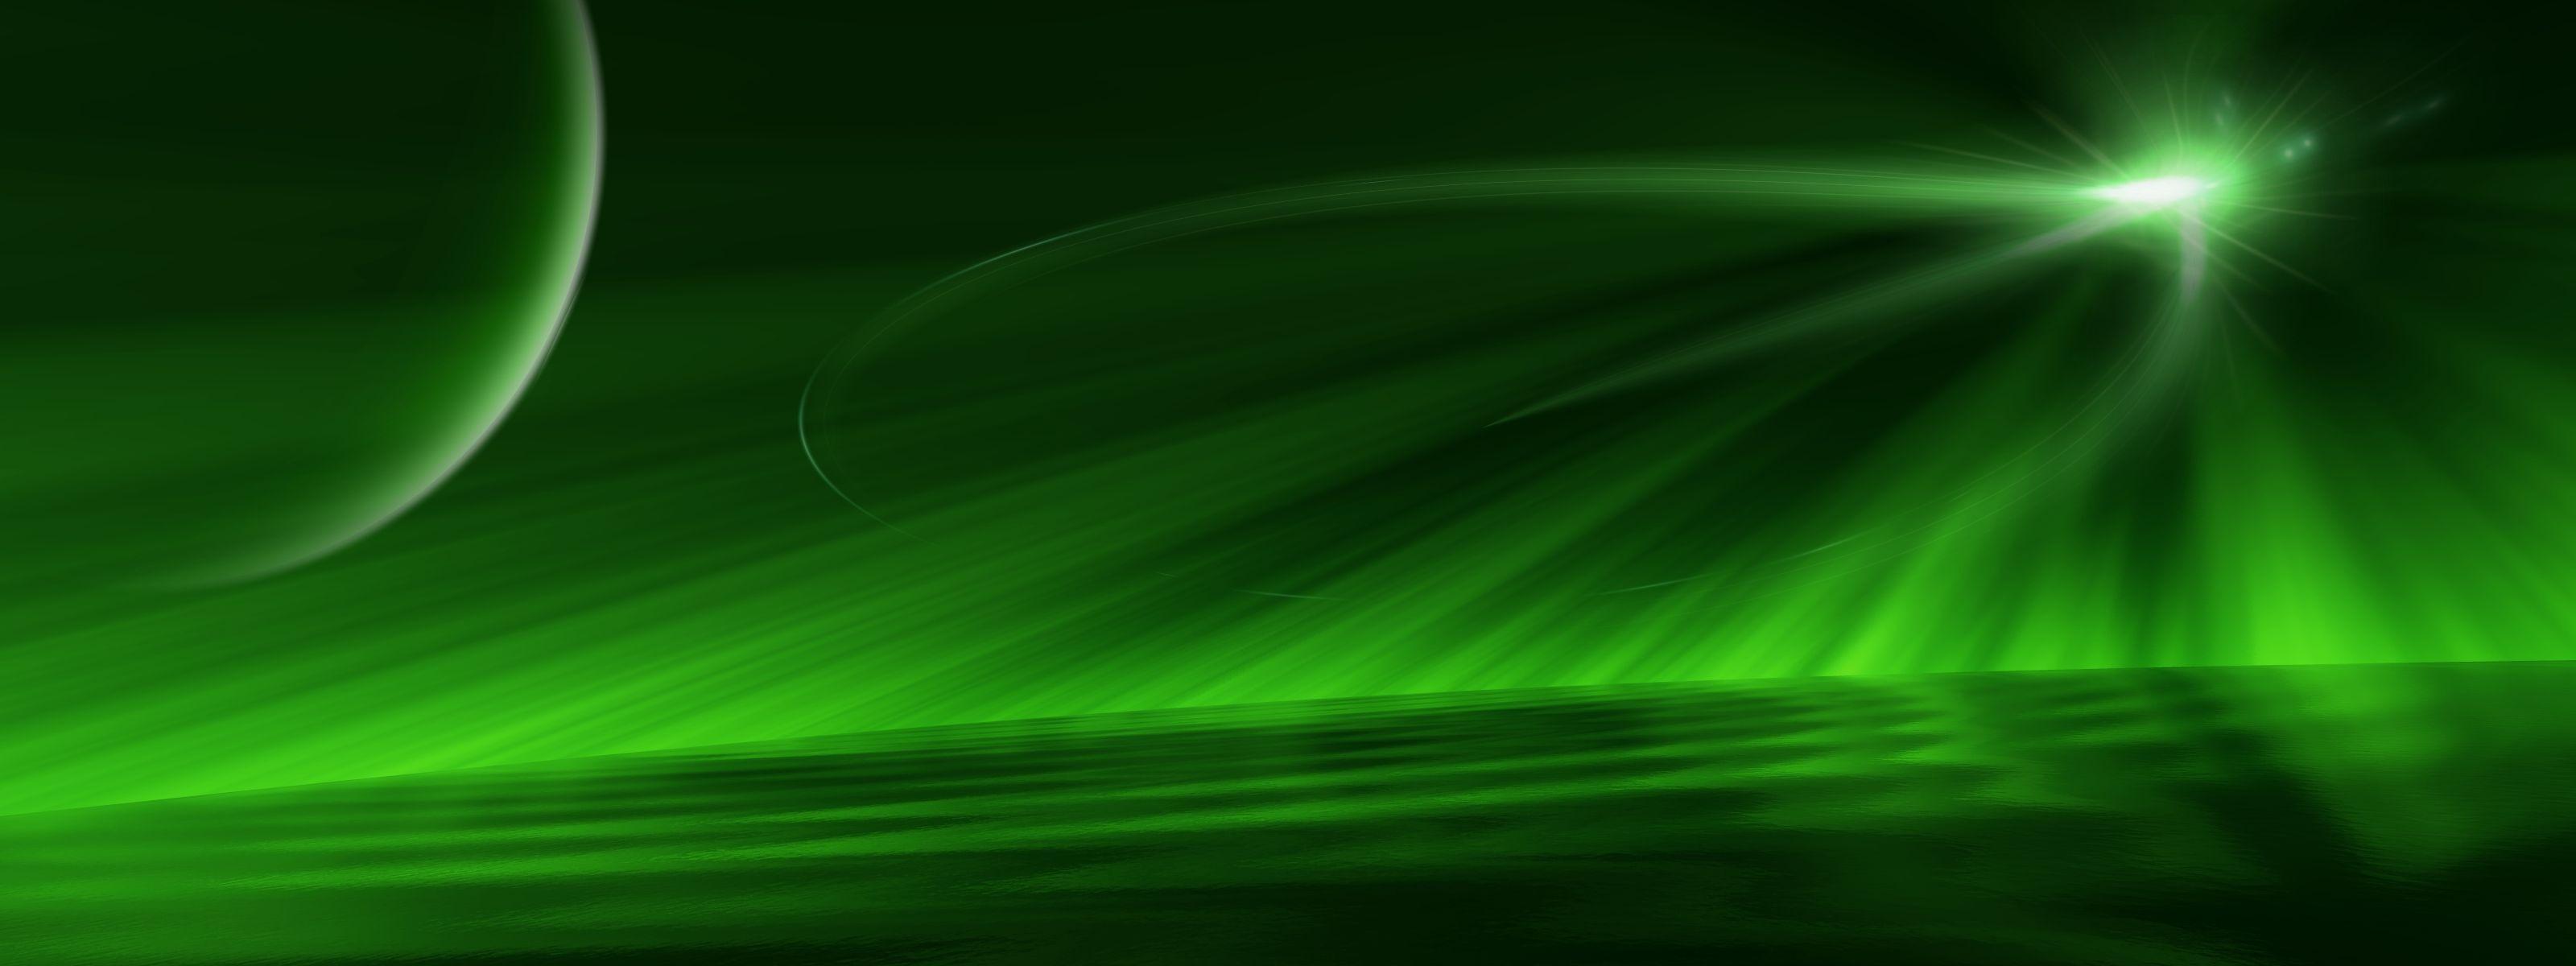 Green Dual Monitor Wallpapers - Top Free Green Dual Monitor Backgrounds